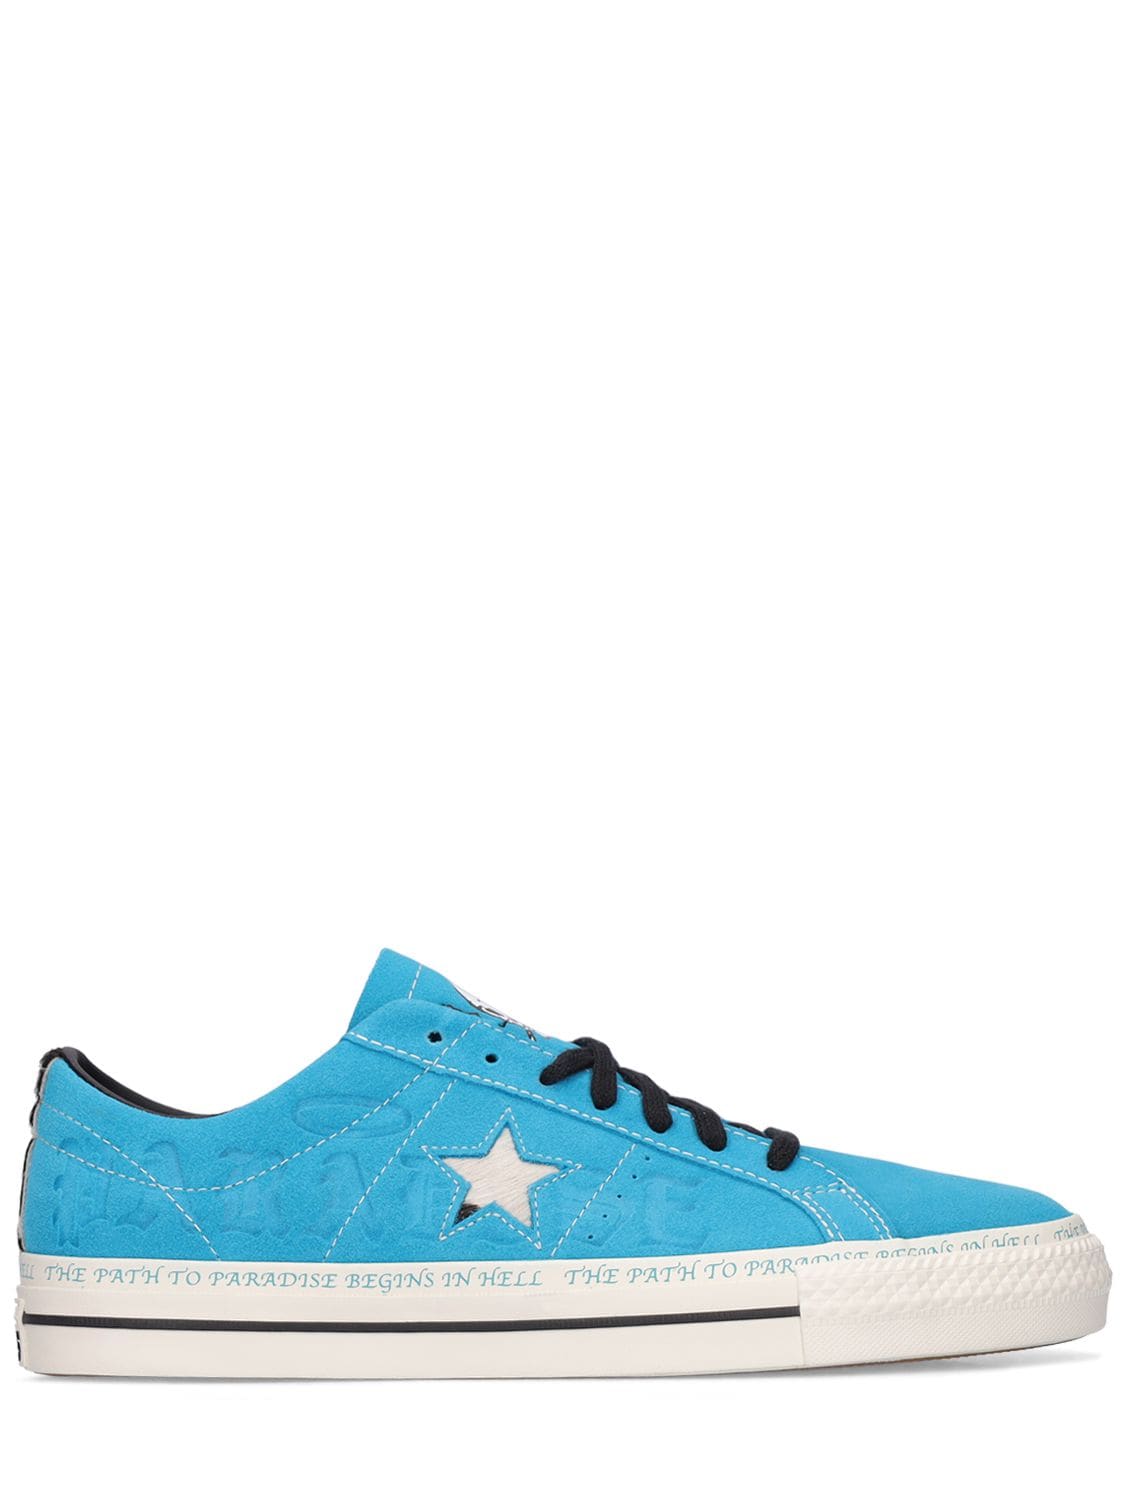 Converse One Star Pro Sean Pablo Shoes In Blue ModeSens